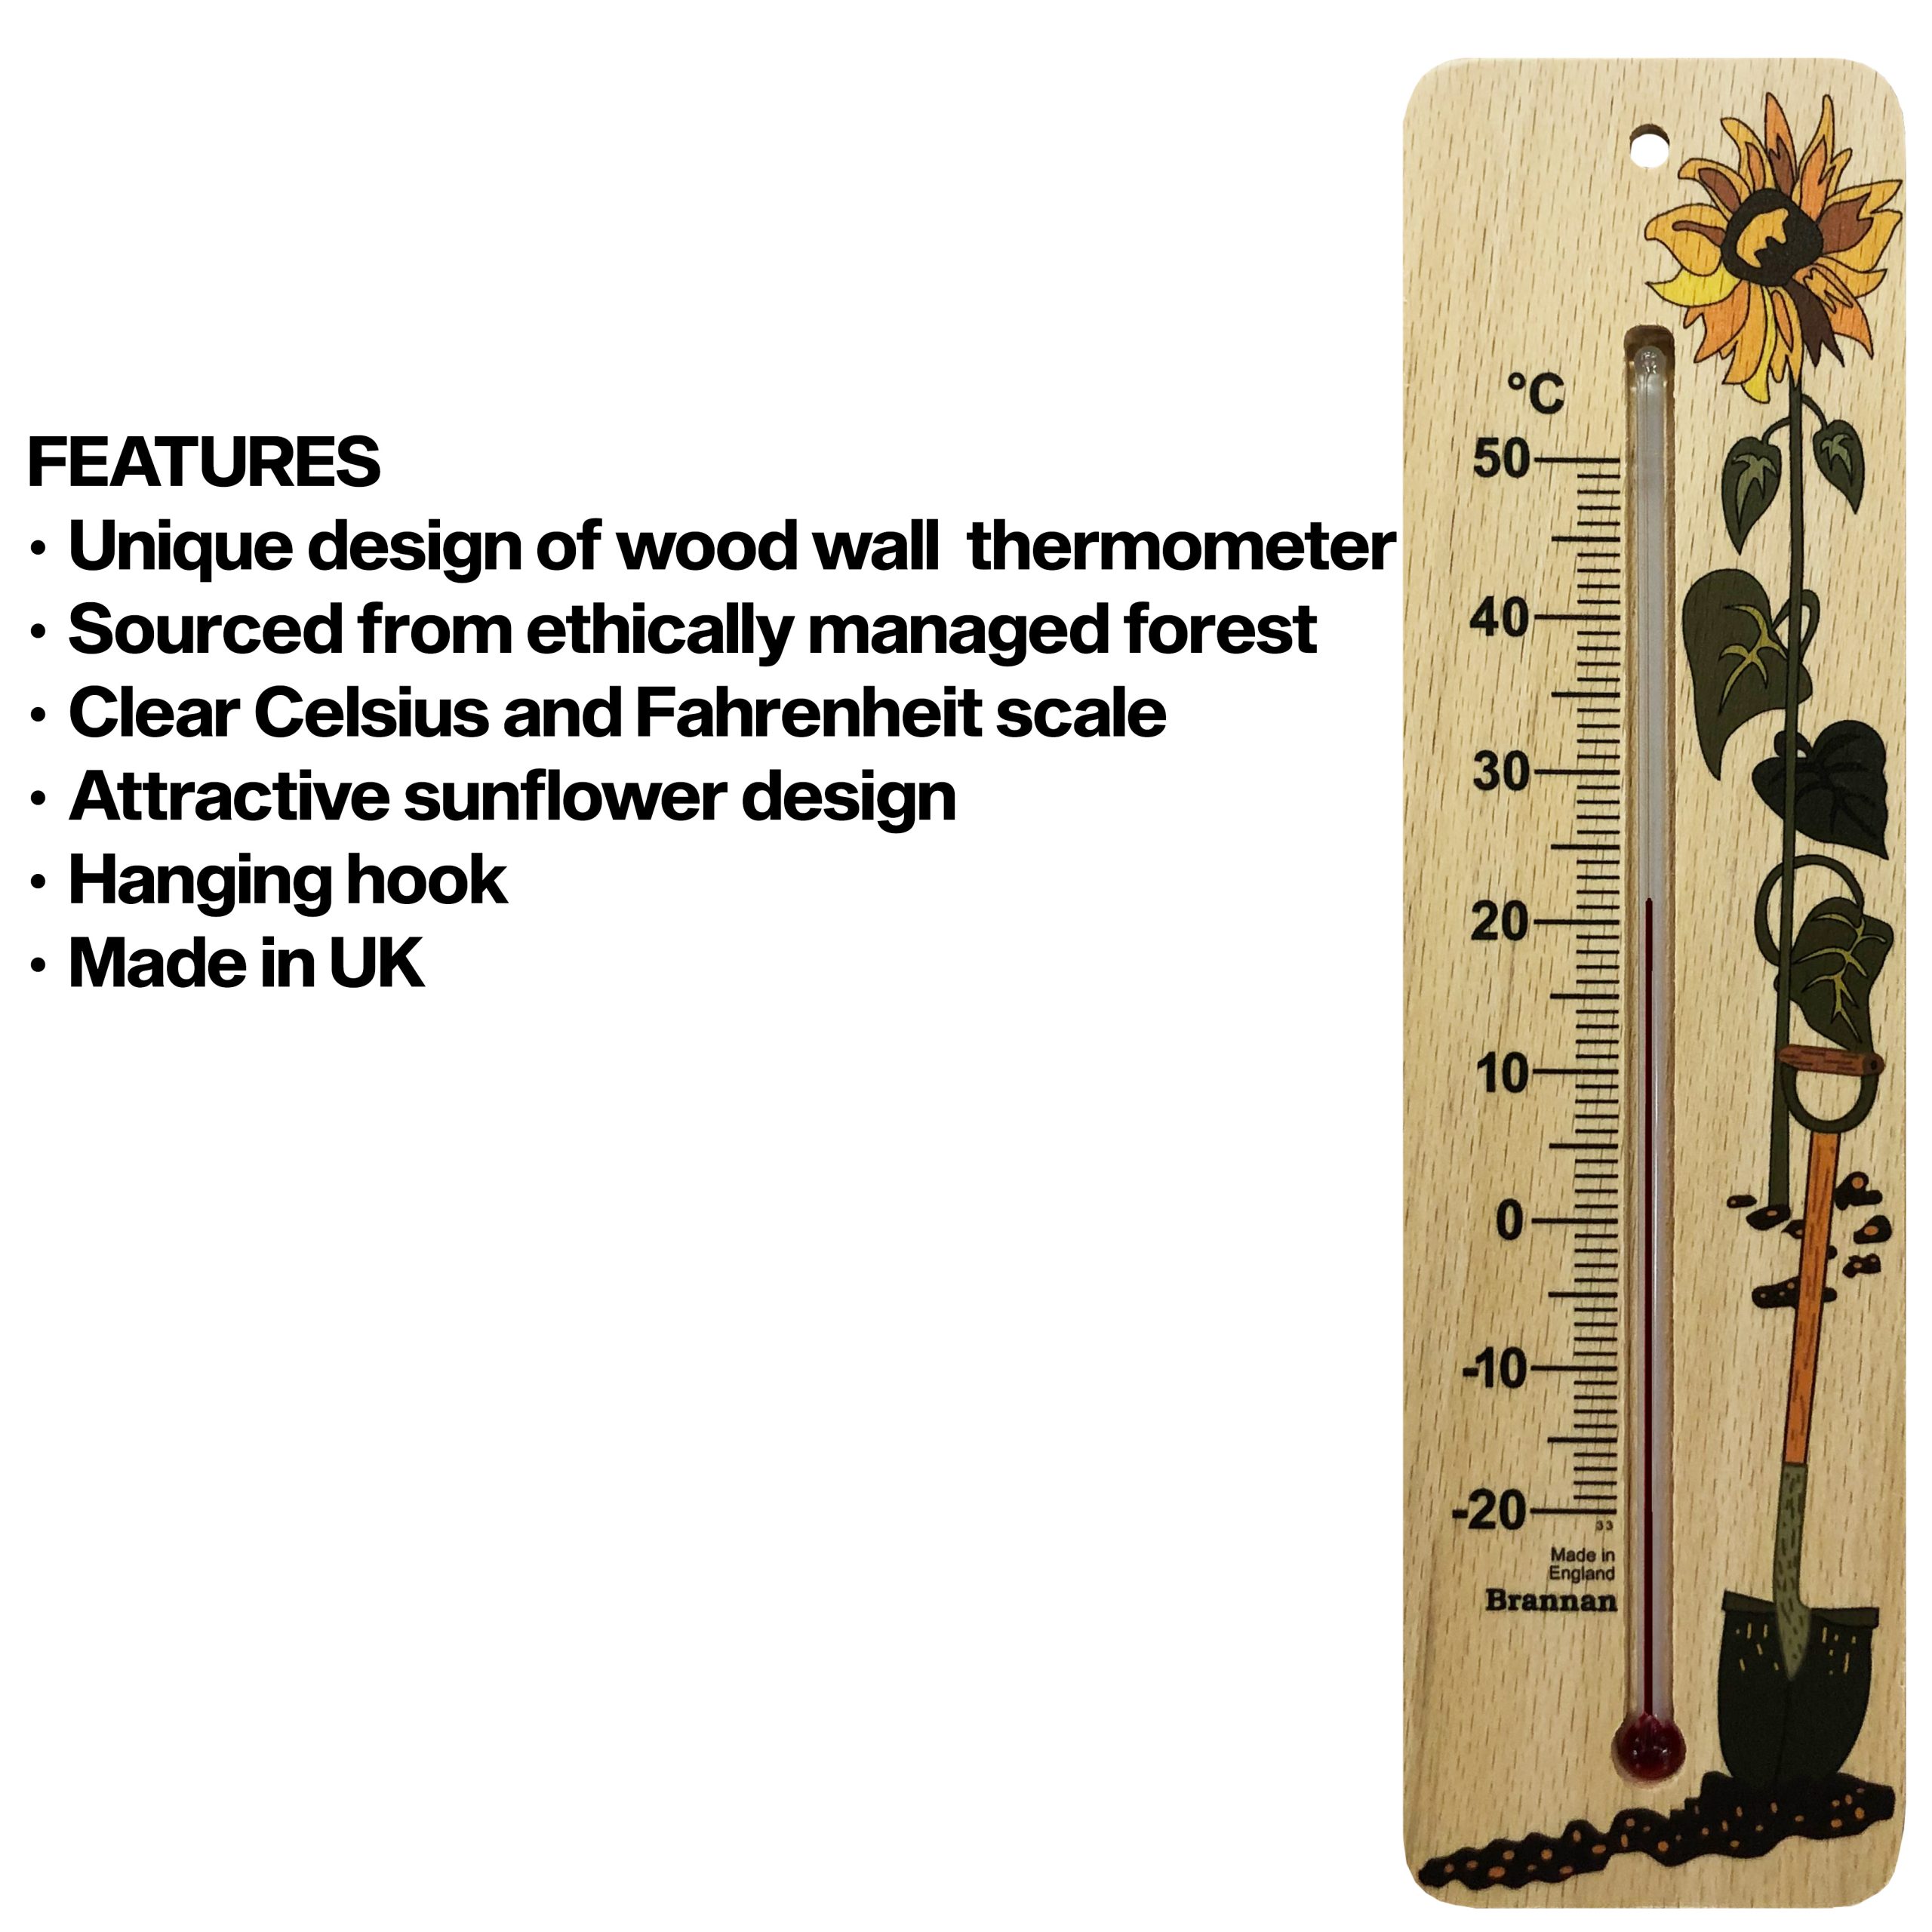 E8R05779 - Brannan Giant Wall Thermometer